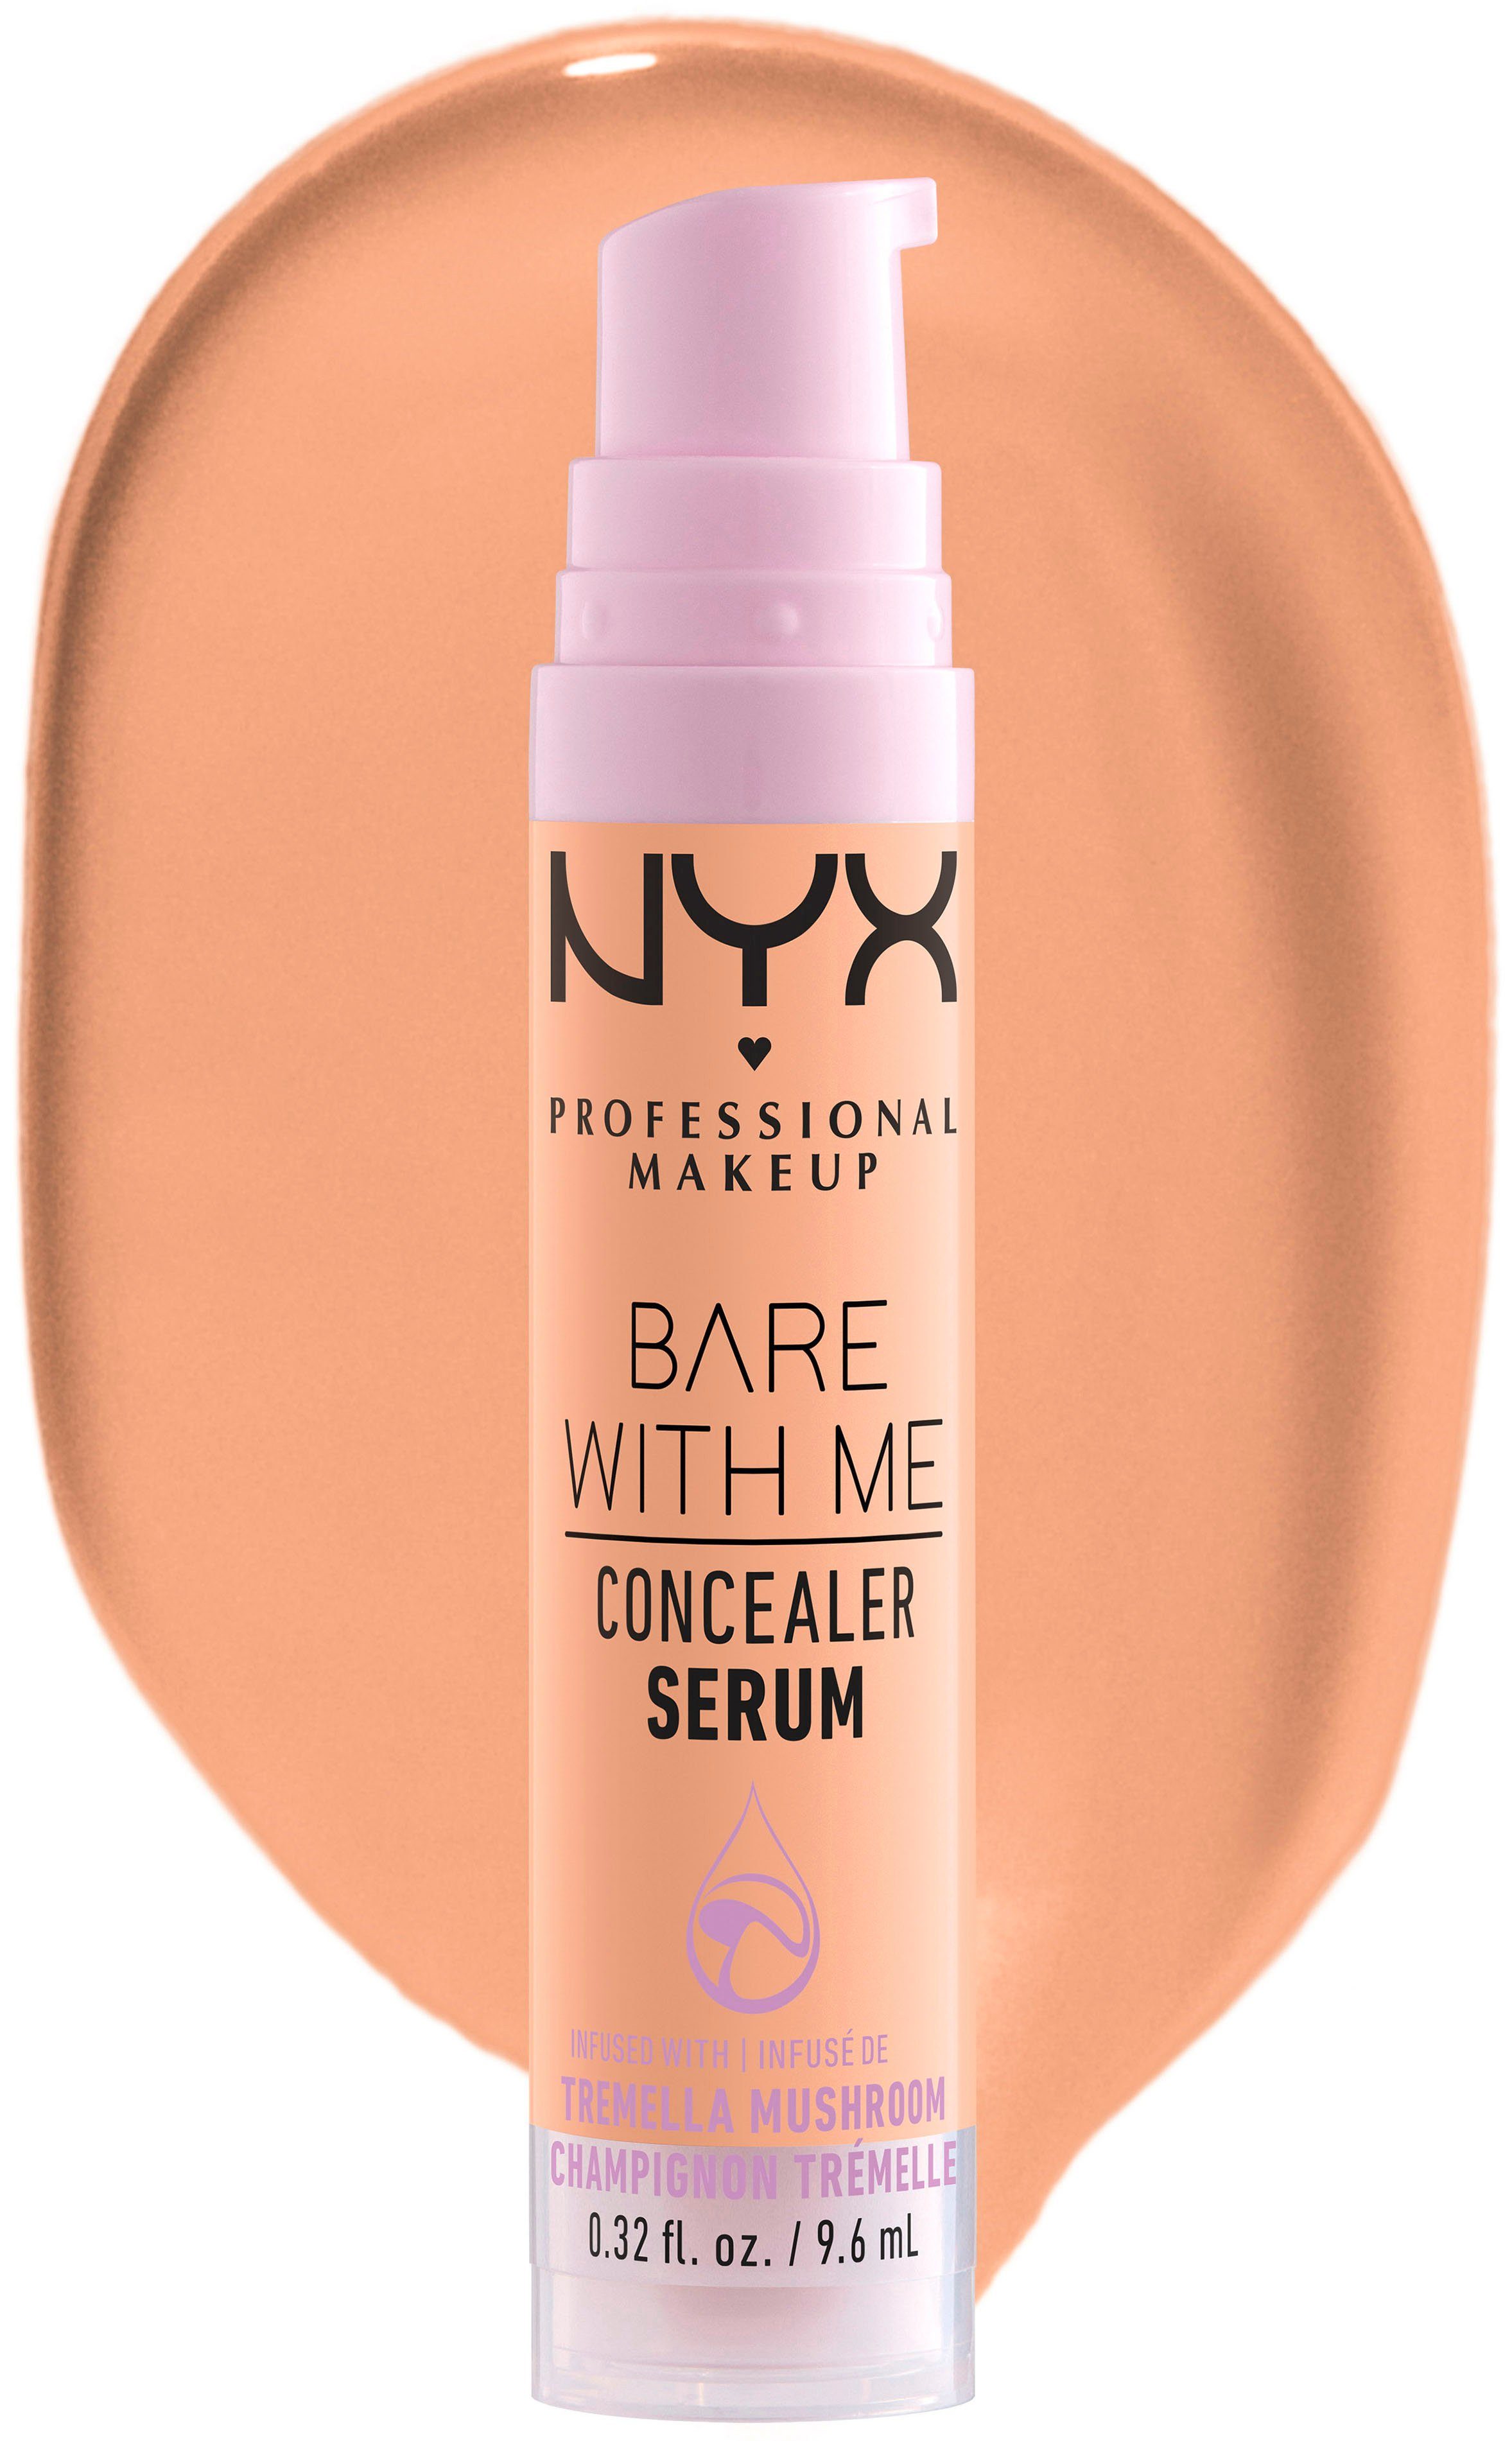 With Concealer Serum Me Bare NYX Concealer